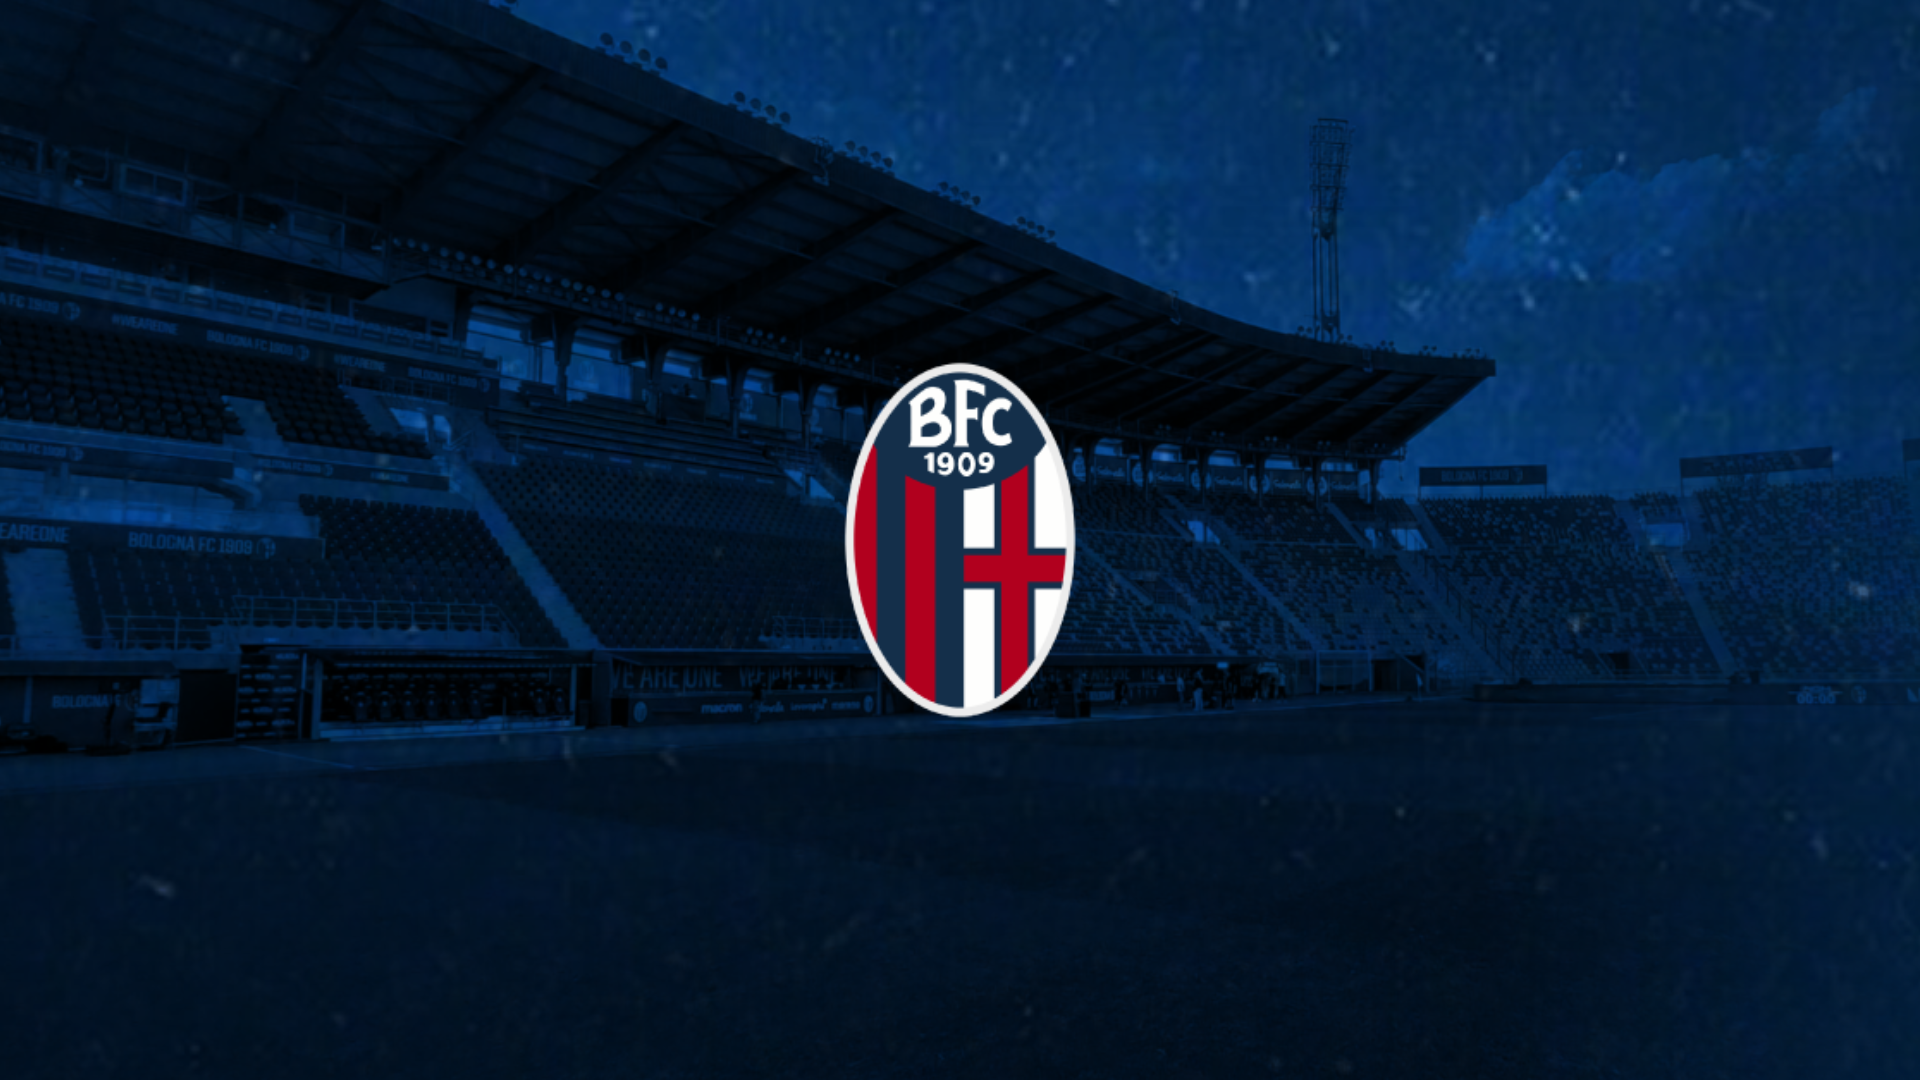 Bologna Fc 1909 - Bologna Fc 1909 updated their cover photo.